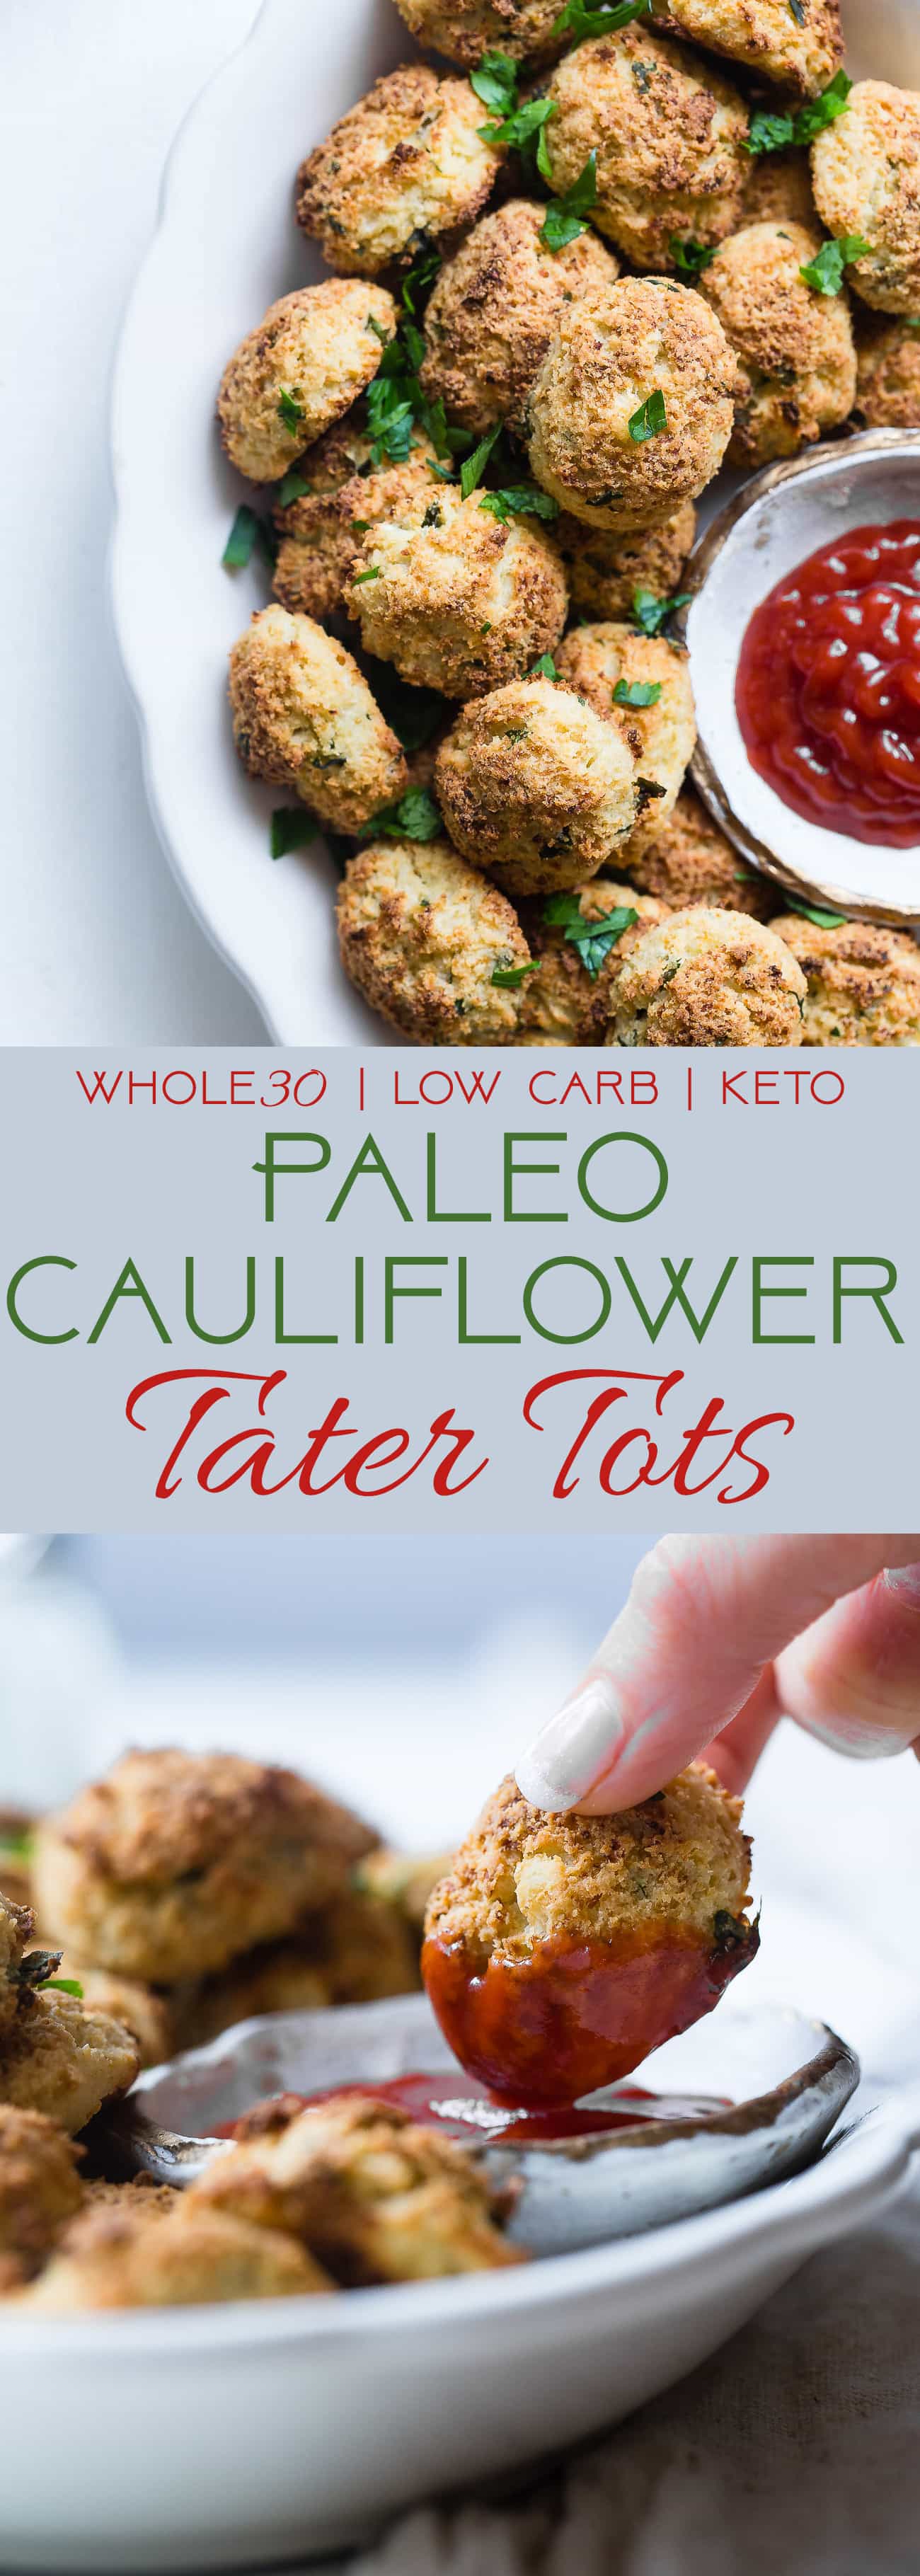 Paleo Cauliflower Tater Tots - So crispy and crunchy you will never believe they're gluten/grain/dairy free, low carb and made from veggies! Even your kids will love them! | Foodfaithfitness.com | @FoodFaithFit